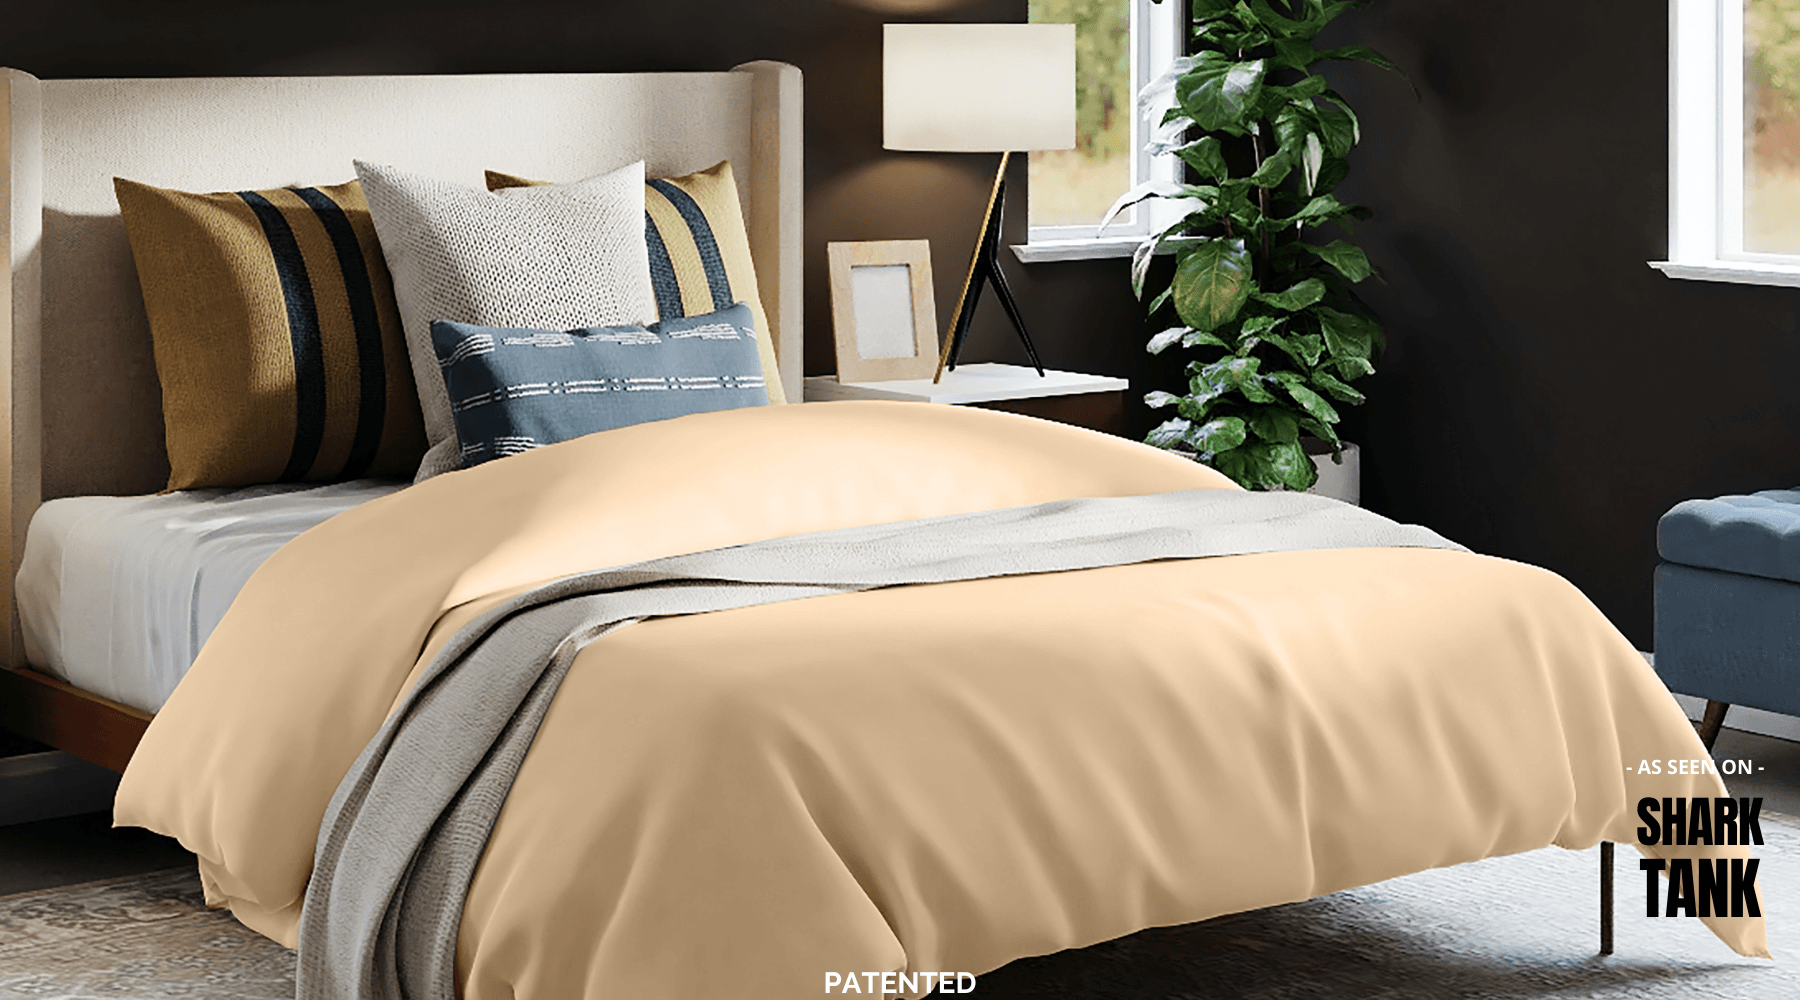 How to Choose A Duvet Cover